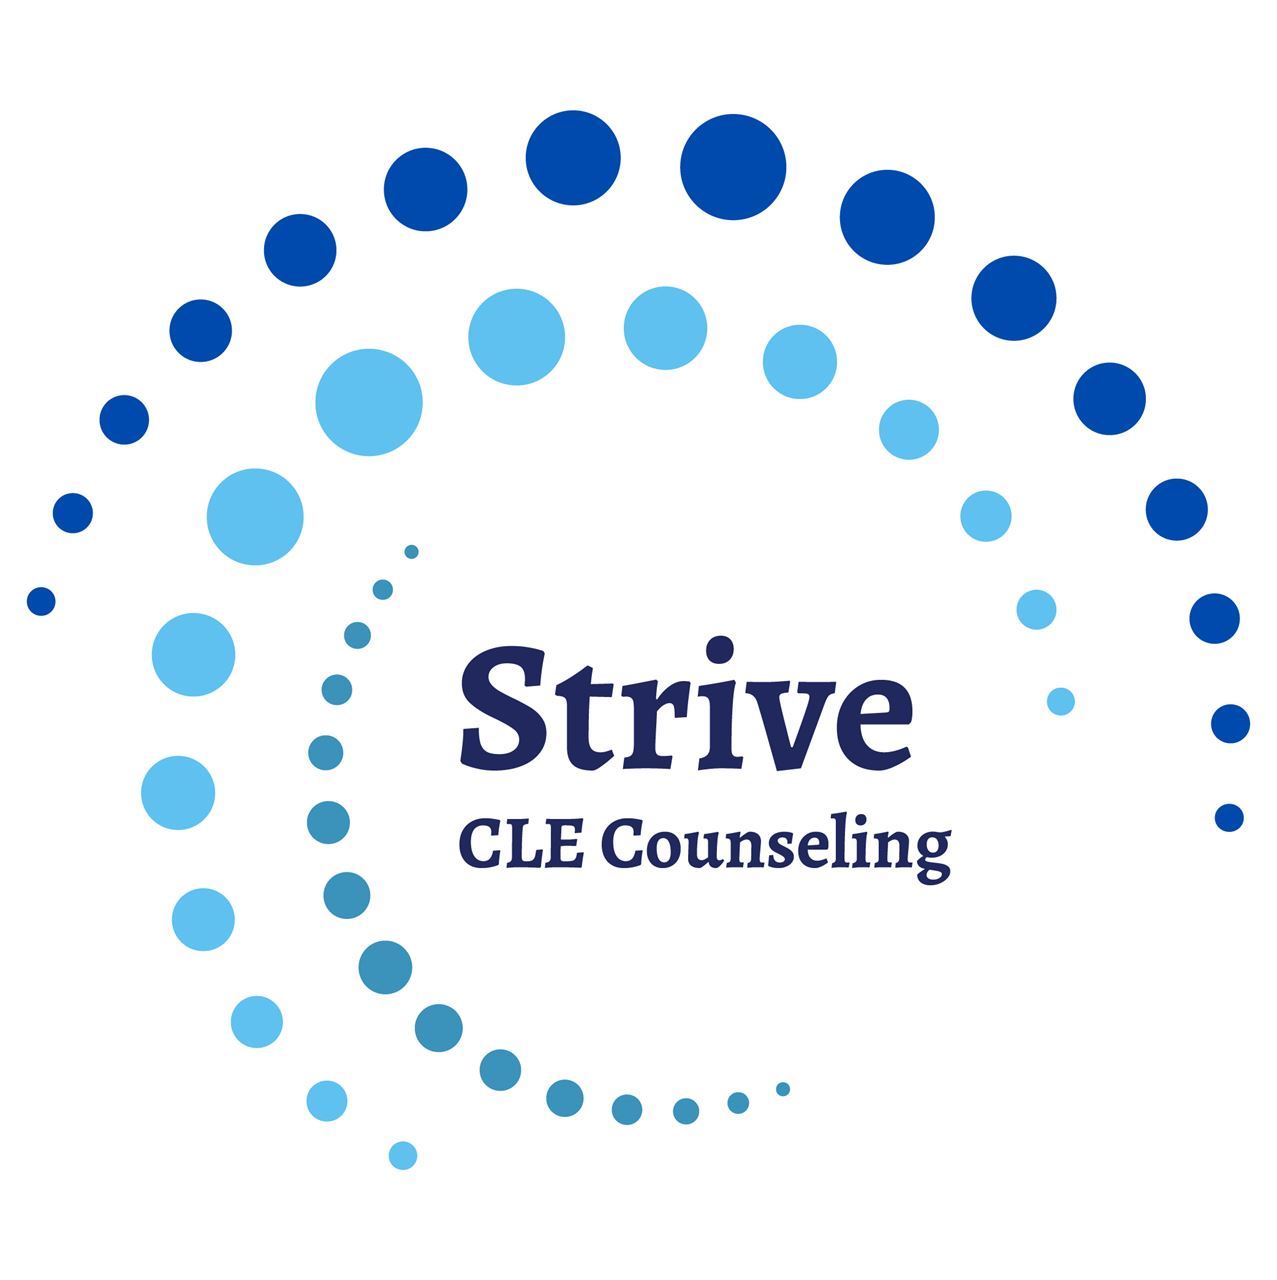 Click to visit the Strive CLE Counseling website